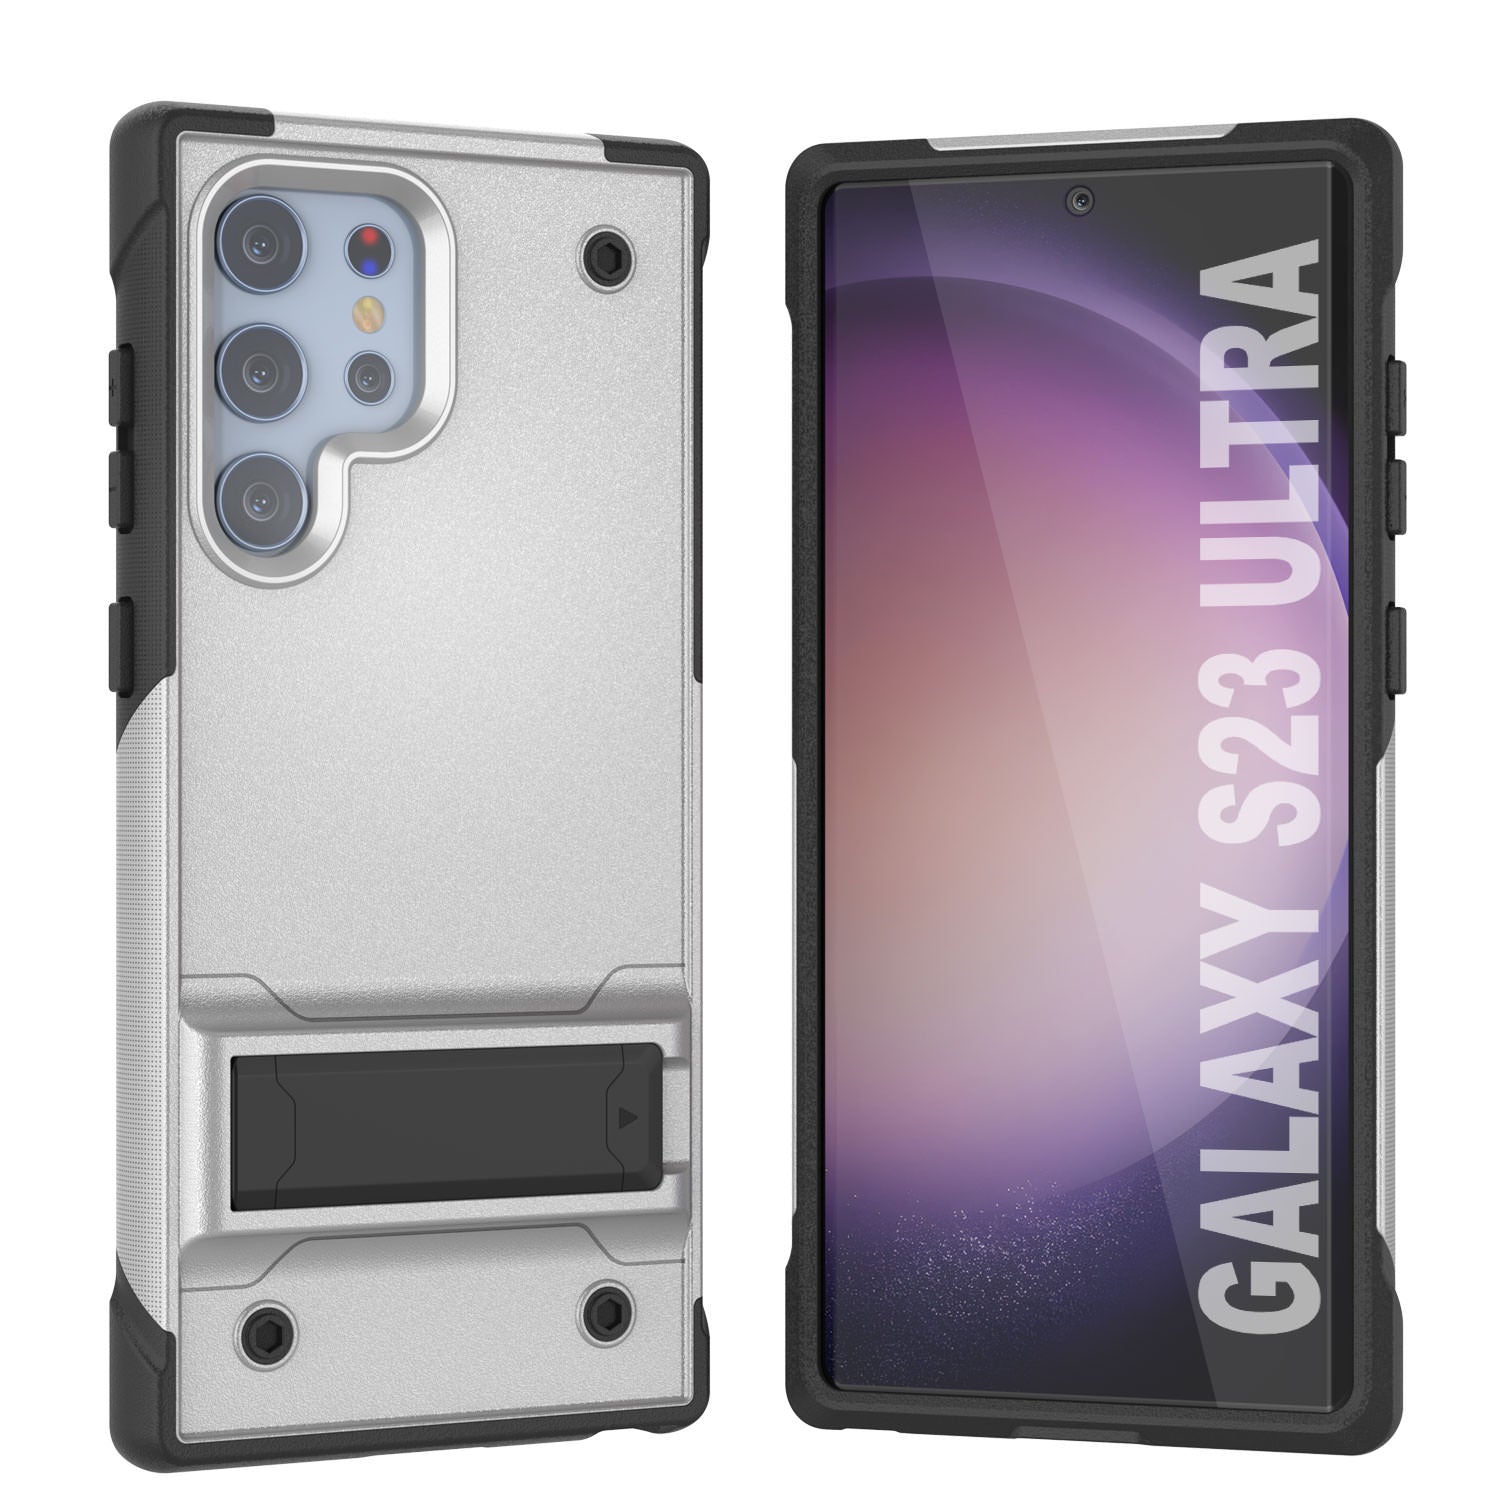 Punkcase Galaxy S24 Ultra Case [Reliance Series] Protective Hybrid Military Grade Cover W/Built-in Kickstand [Teal]